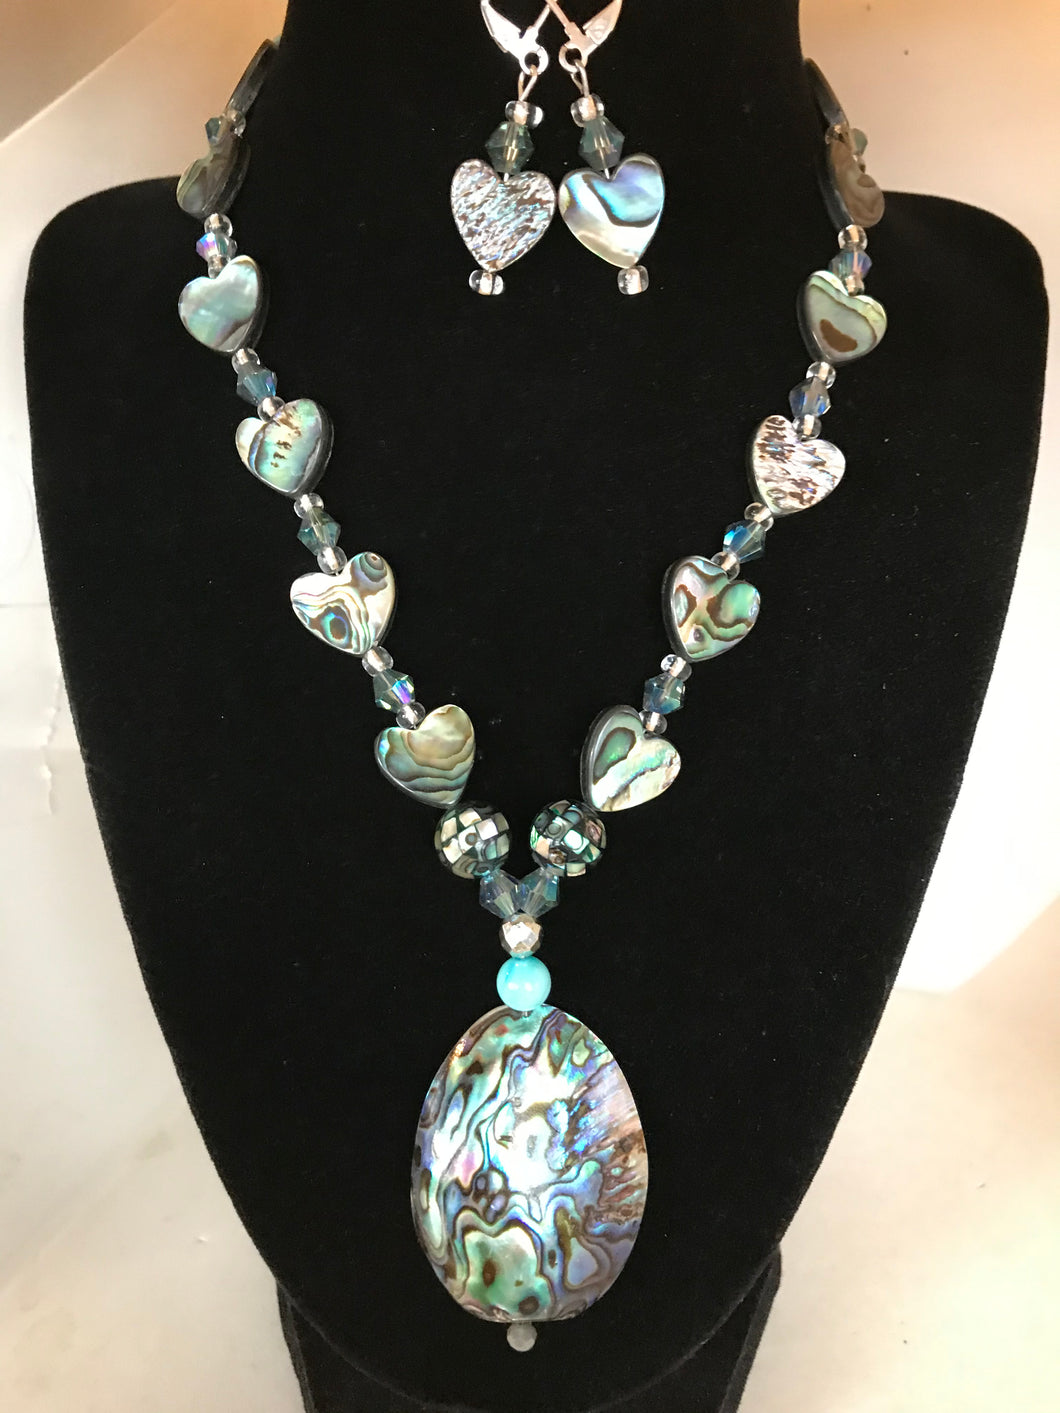 Abalone necklace with hearts and earrings.